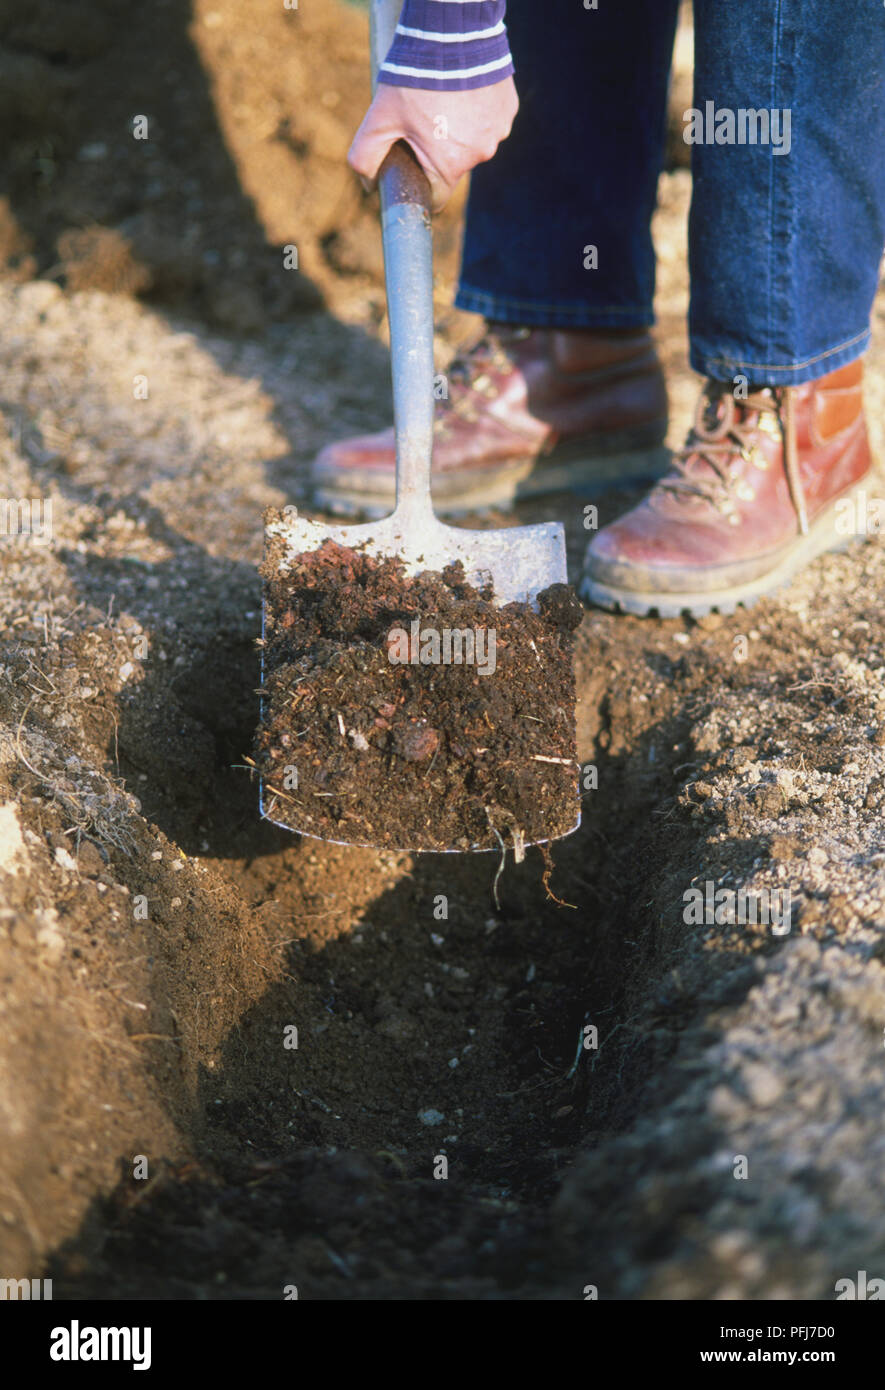 Organic matter being added to hole in the ground with a garden spade. Stock Photo